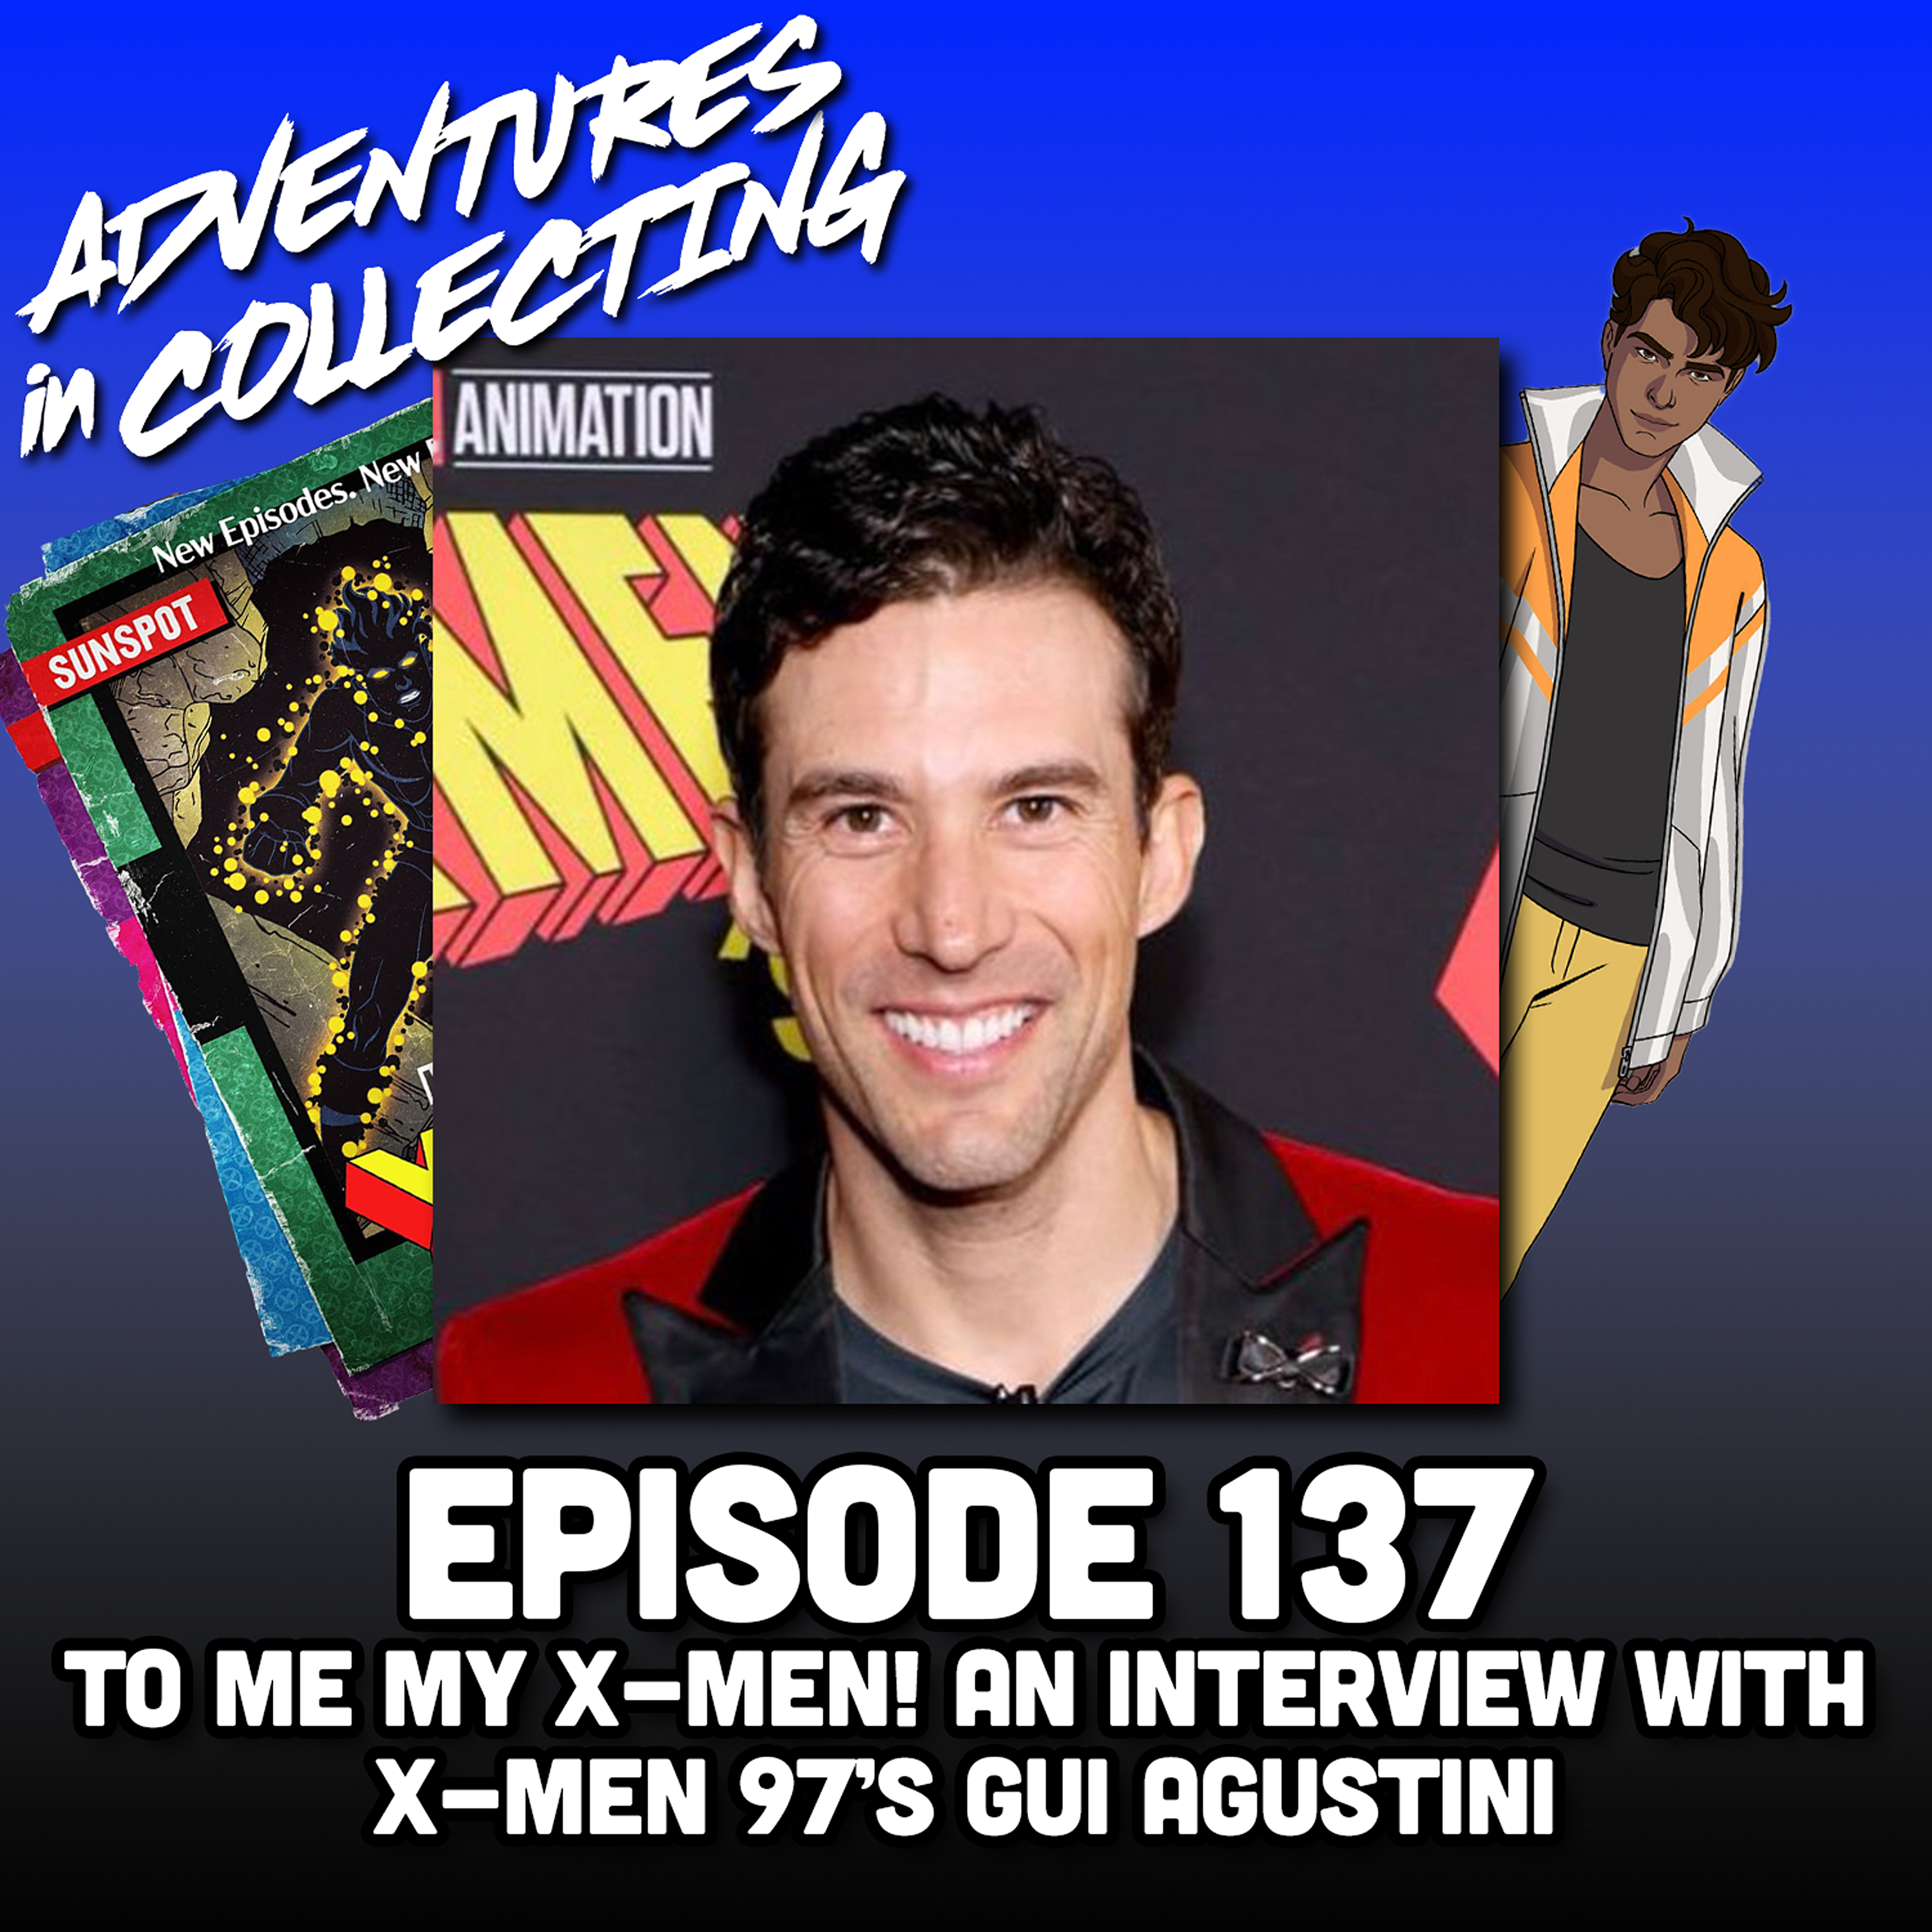 To Me My X-Men! An Interview with X-Men 97’s Gui Agustini